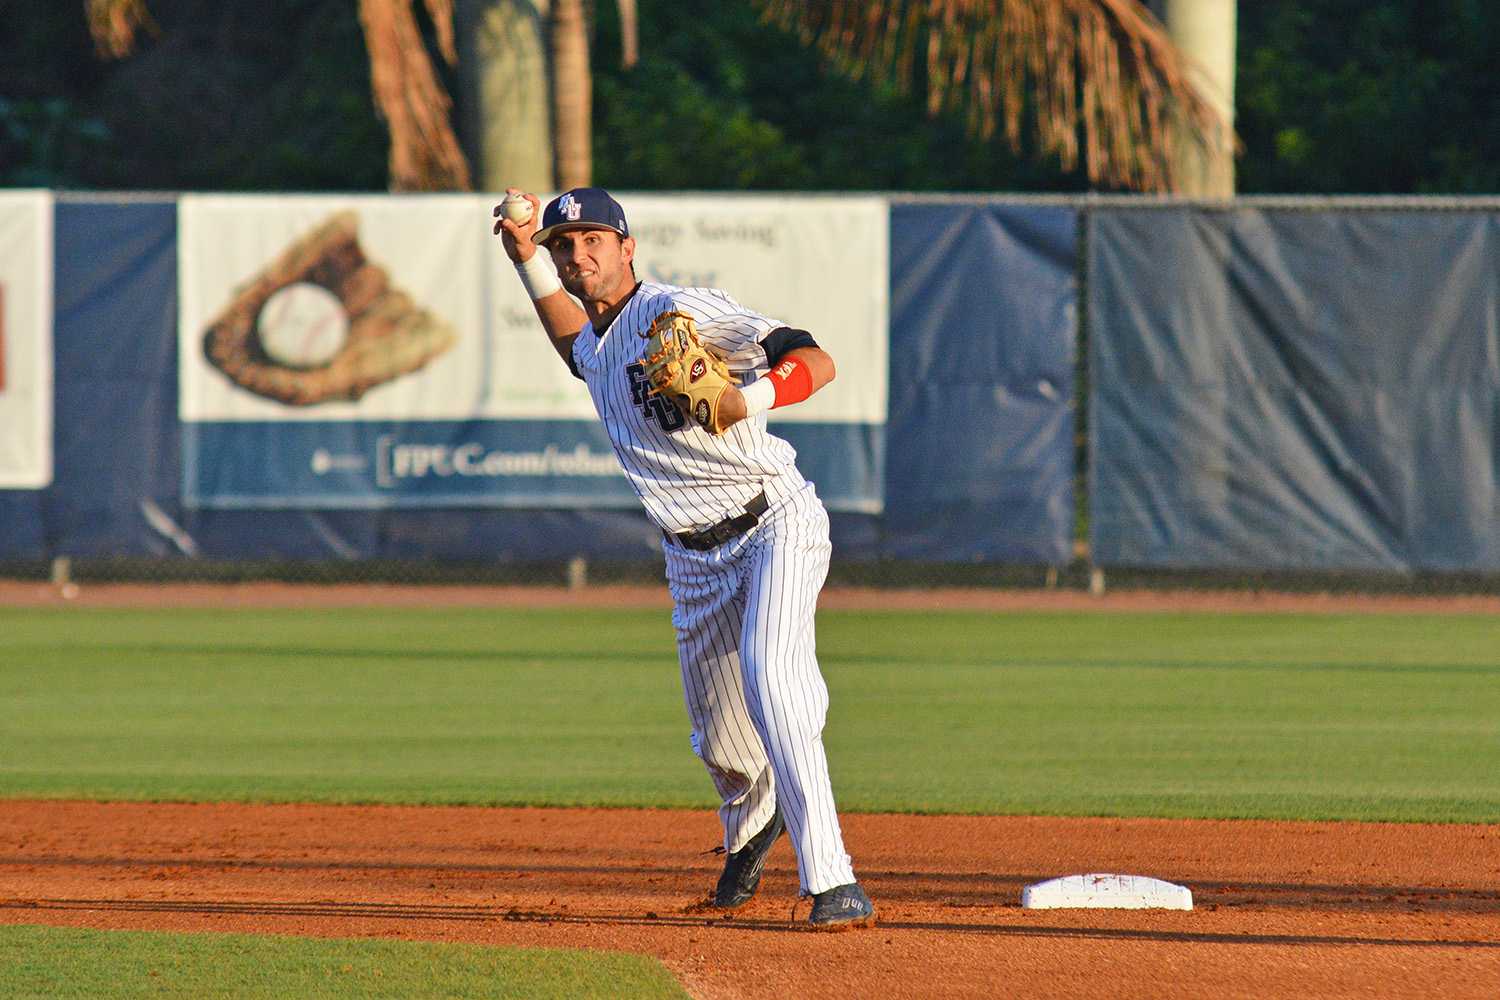 Shortstop CJ Chatham picked up one run and one hit in Friday's 4-2 victory over Middle Tennessee. Photo by Michelle Friswell | Associate Editor